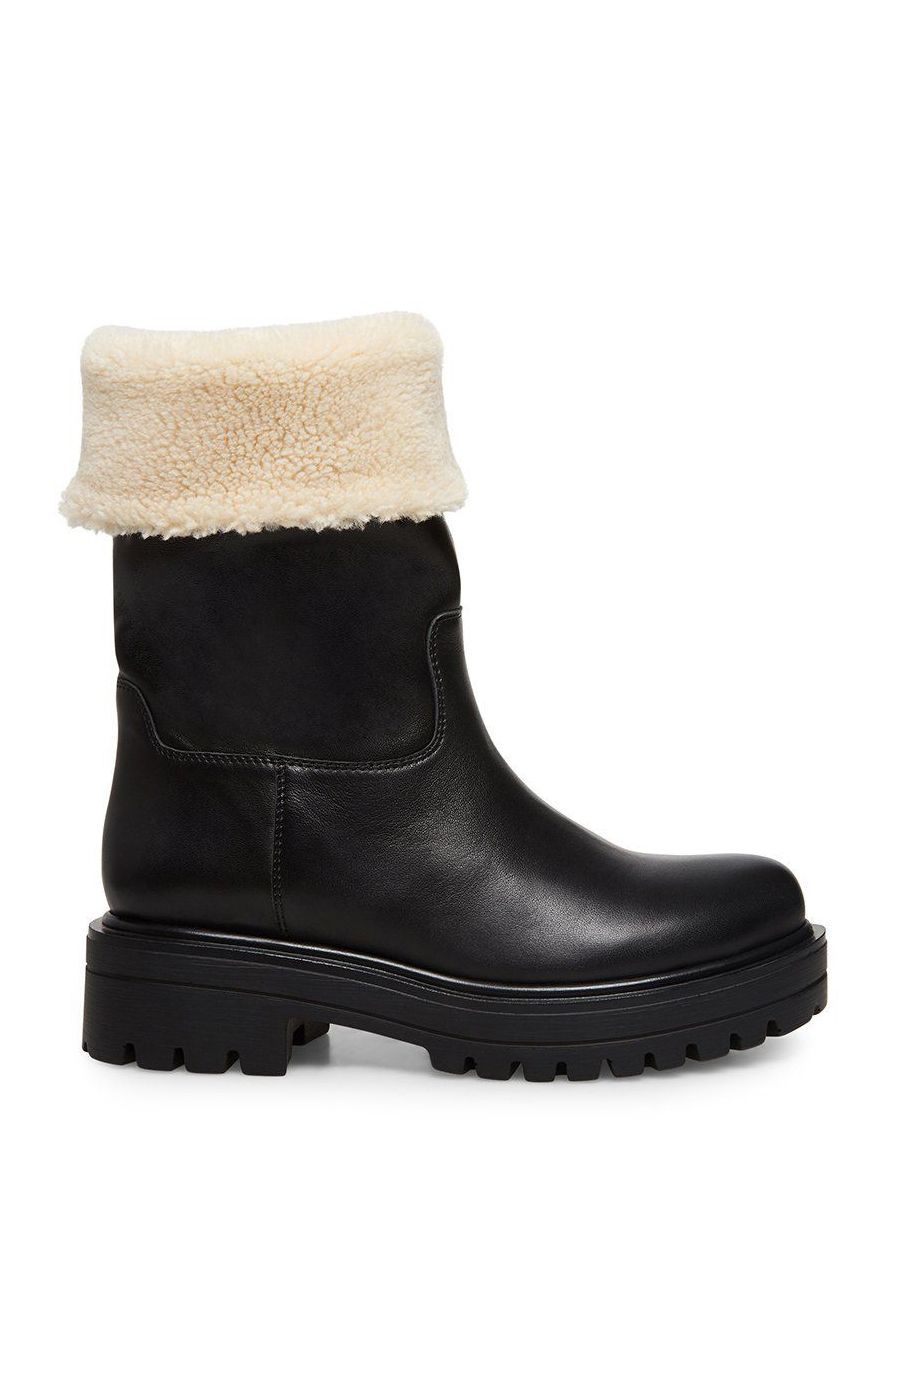 cute tall boots for fall